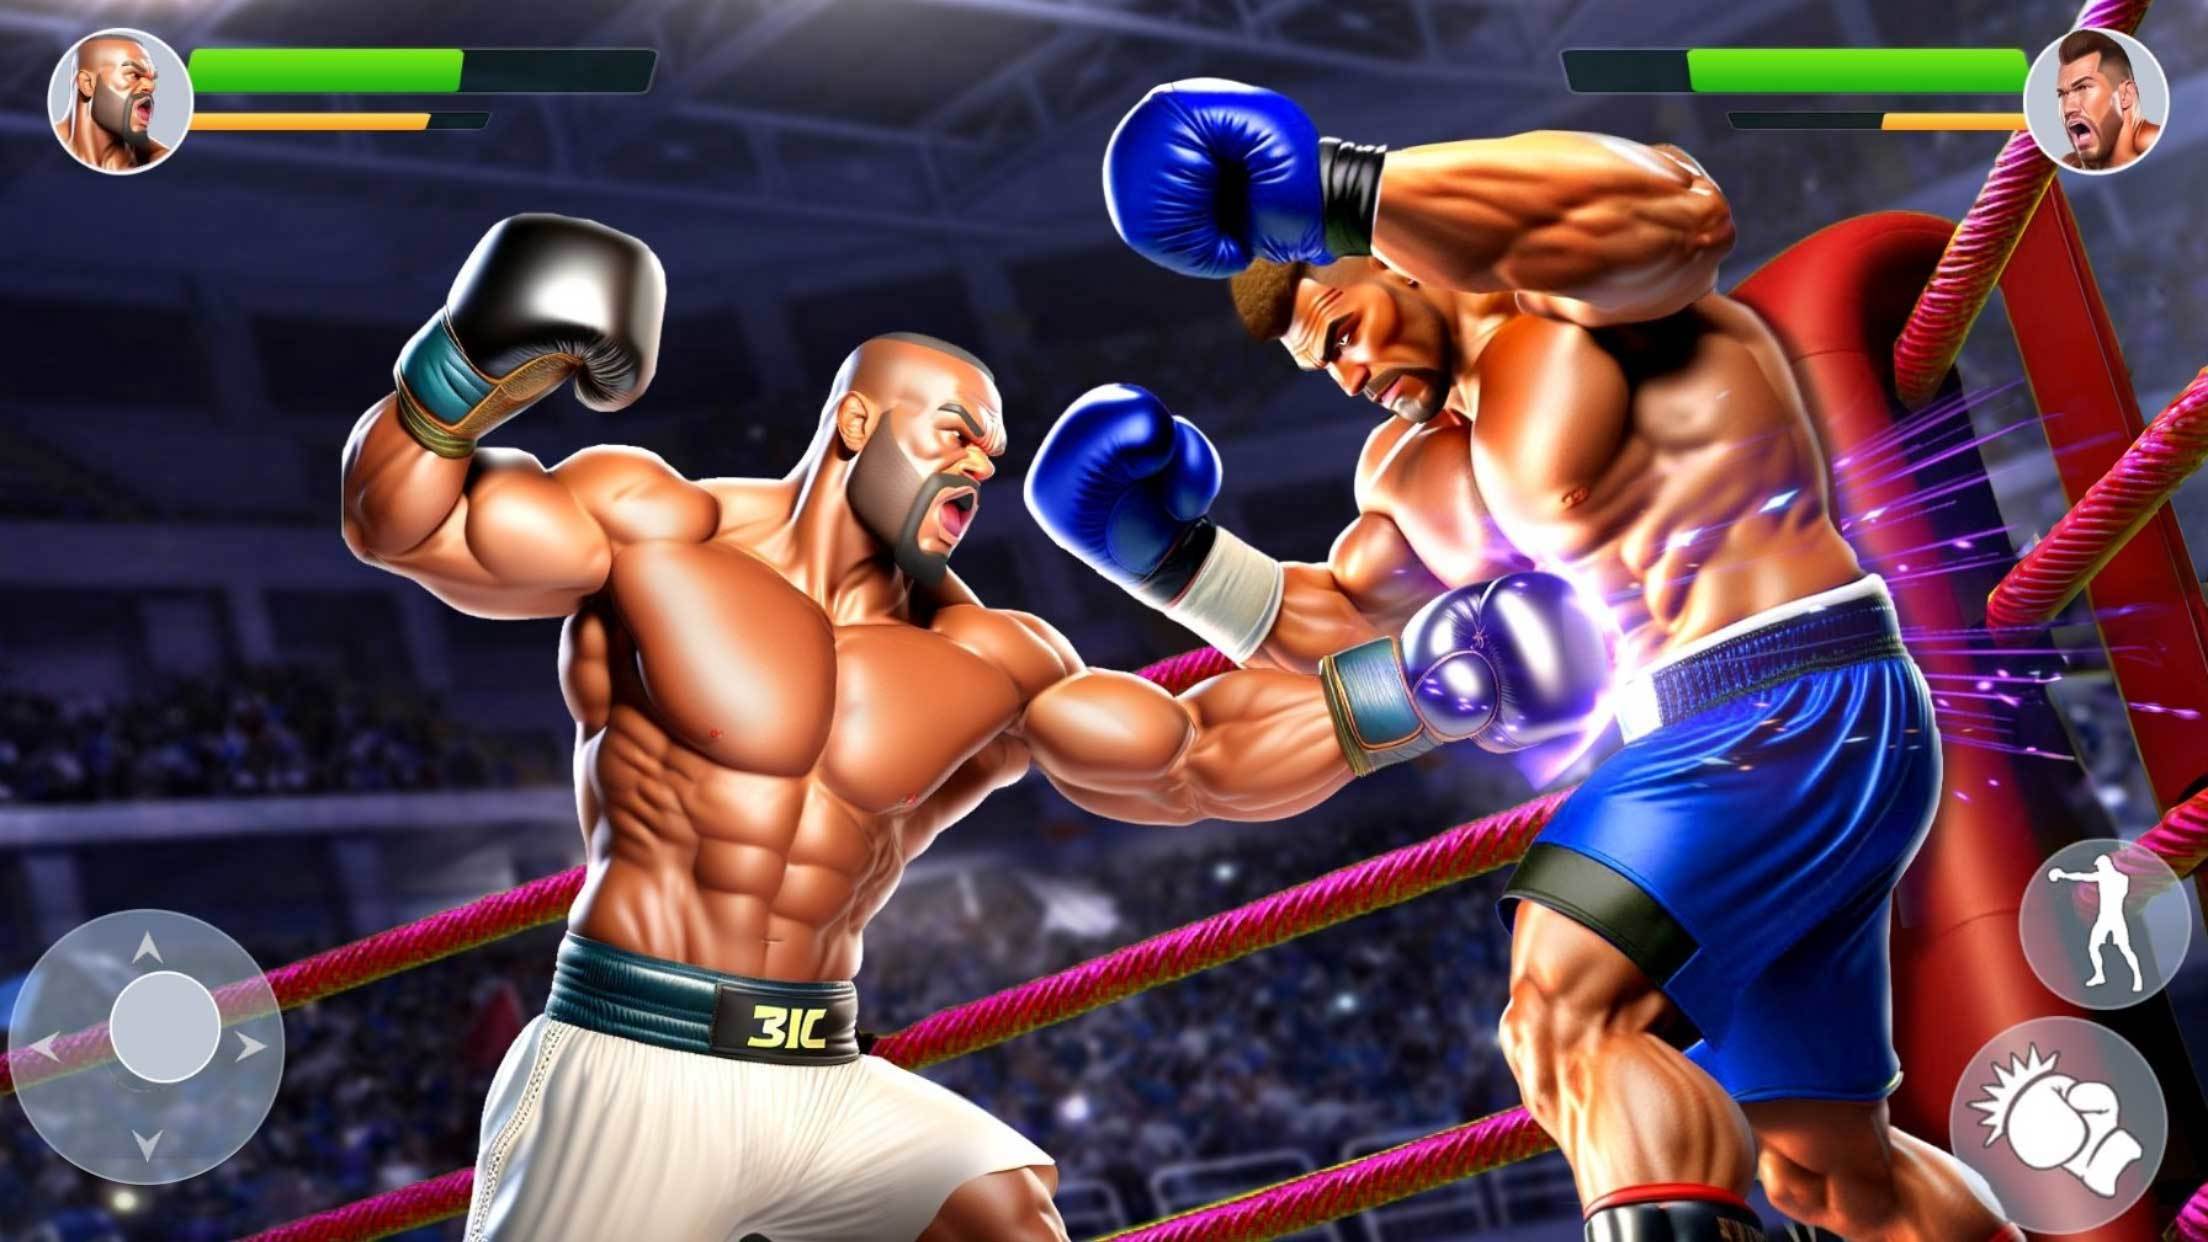 Screenshot 1 of Tag Boxing Games- Punch Fight 8.5